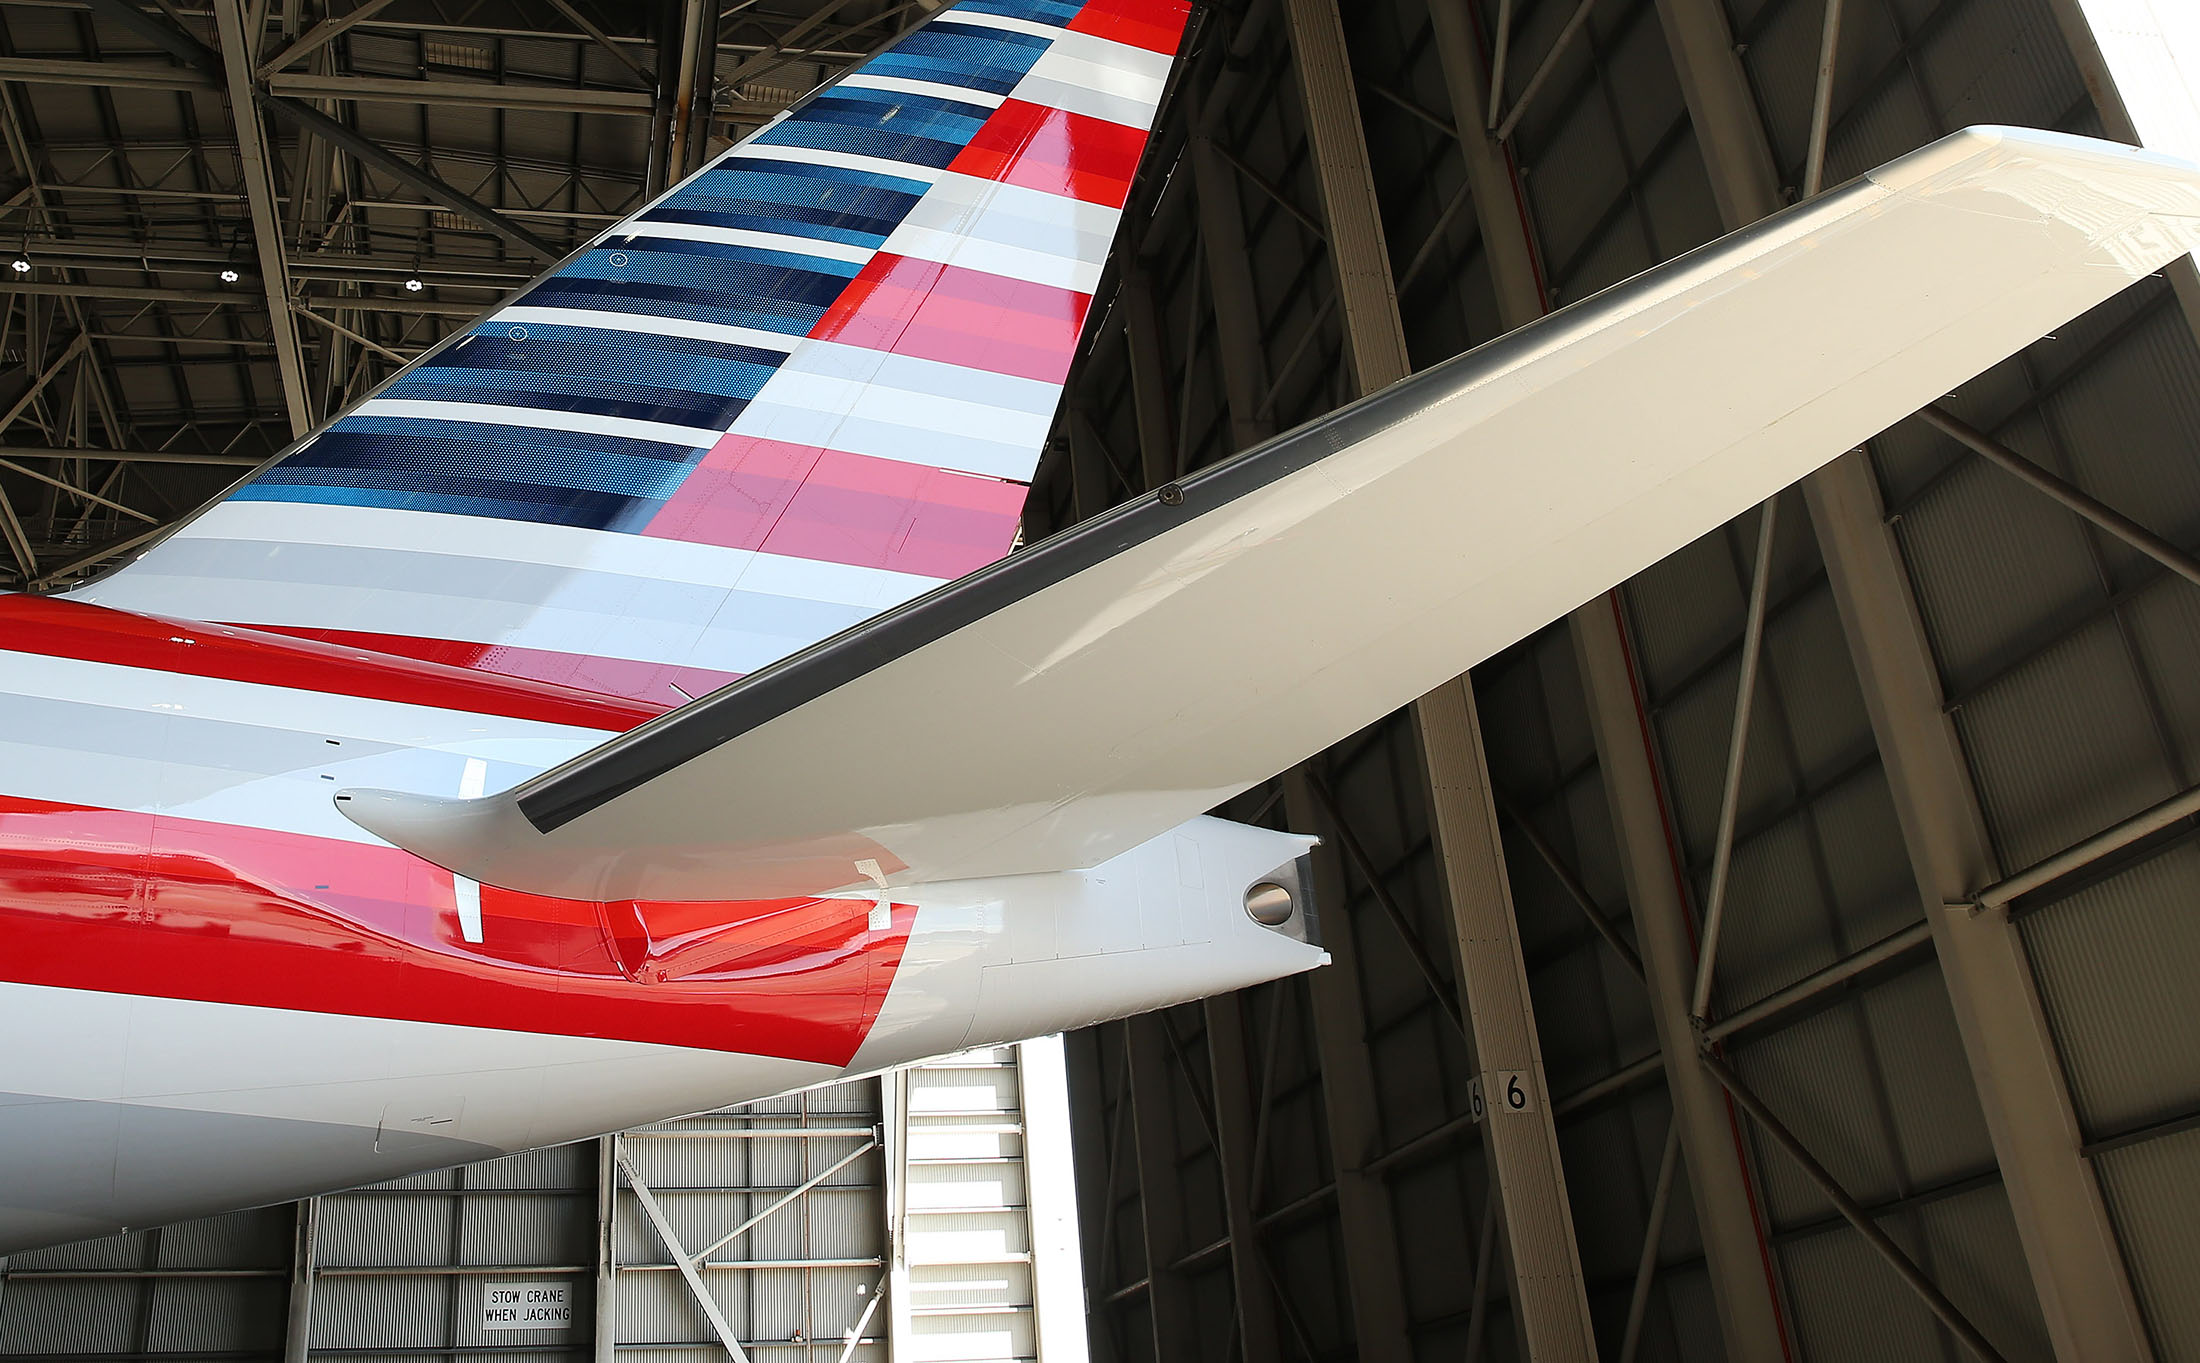 American Airlines readies more jets to meet rising demand